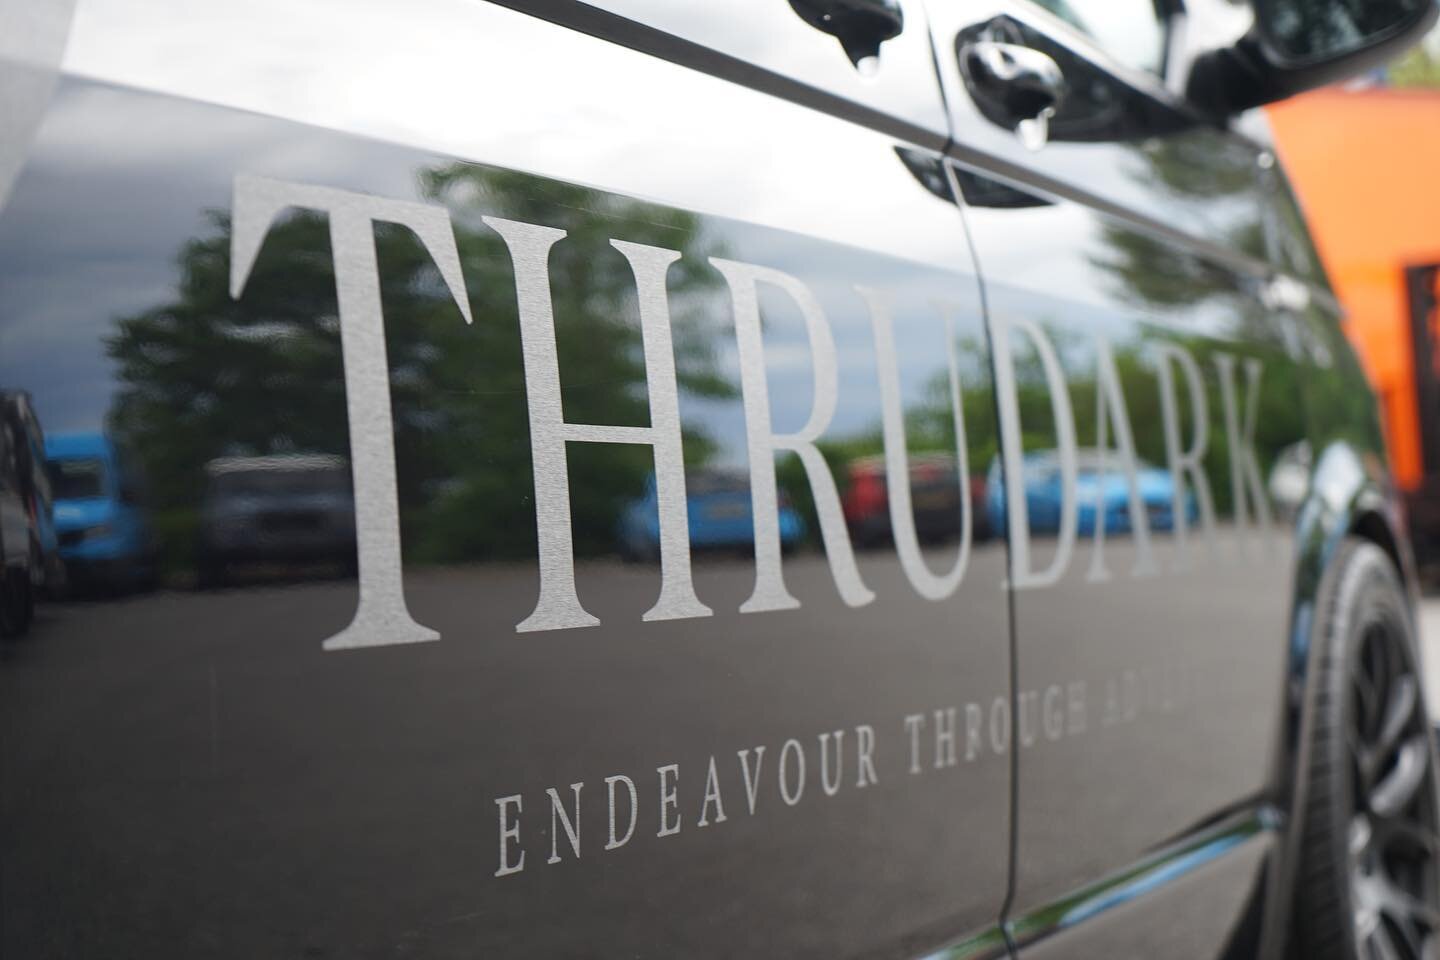 The @thrudark Batmobile got some subtle love last summer! 

This transporter was branded using brushed satin black branding to create a sophisticated stealthy look. It&rsquo;s all about the details with this one with even branding applied to the allo